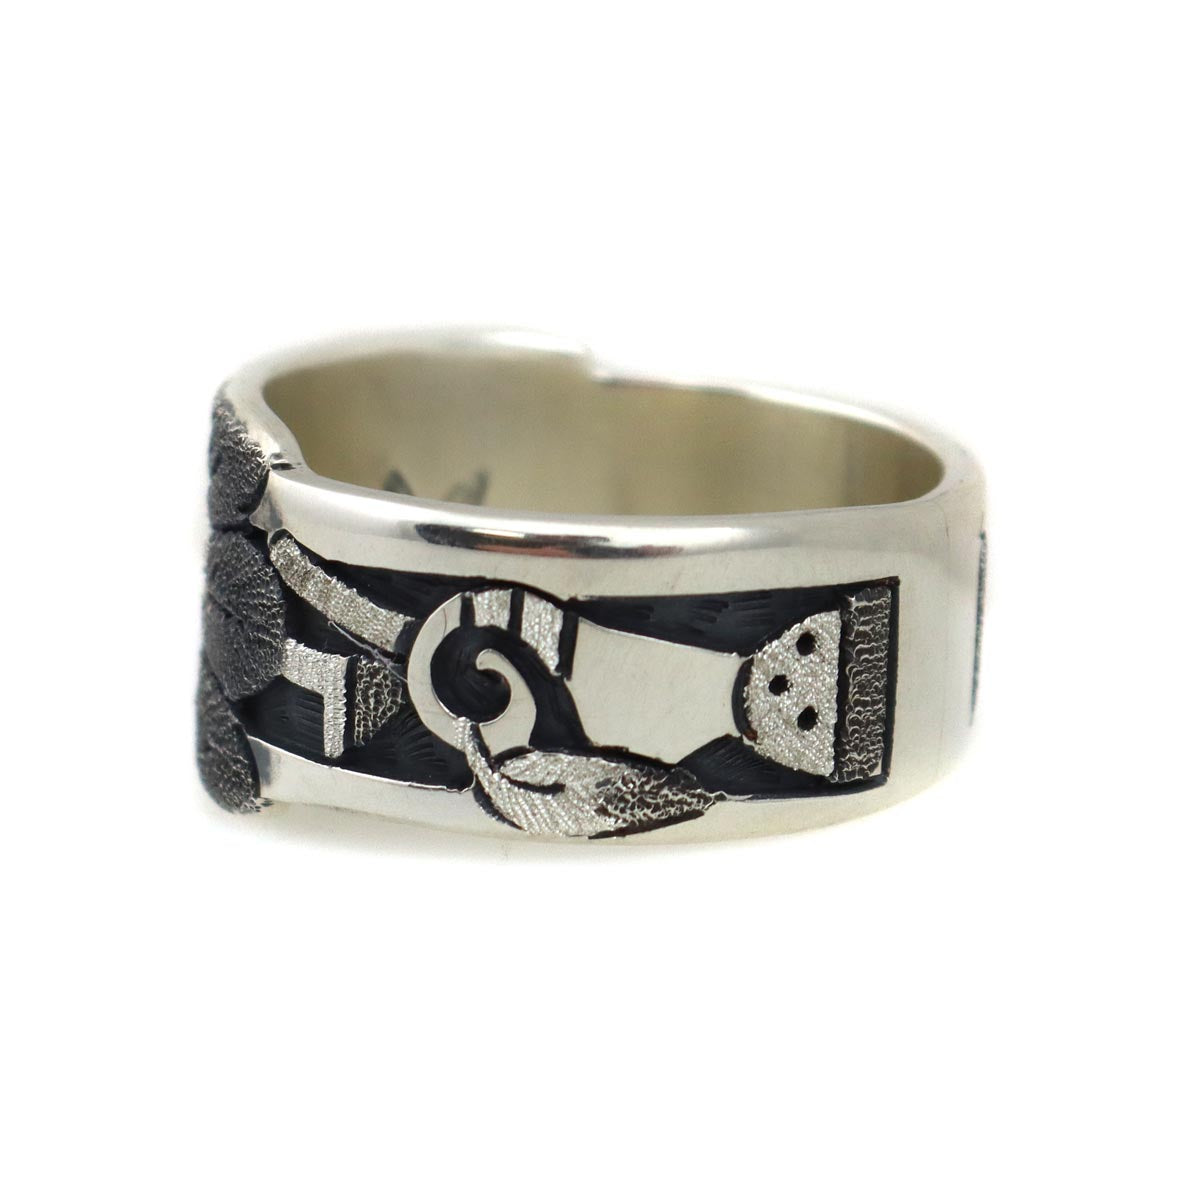 Ronald Wadsworth - Hopi Contemporary Sterling Silver Overlay Ring with Sunface Kachina Design, size 10.75 (J14774) 3